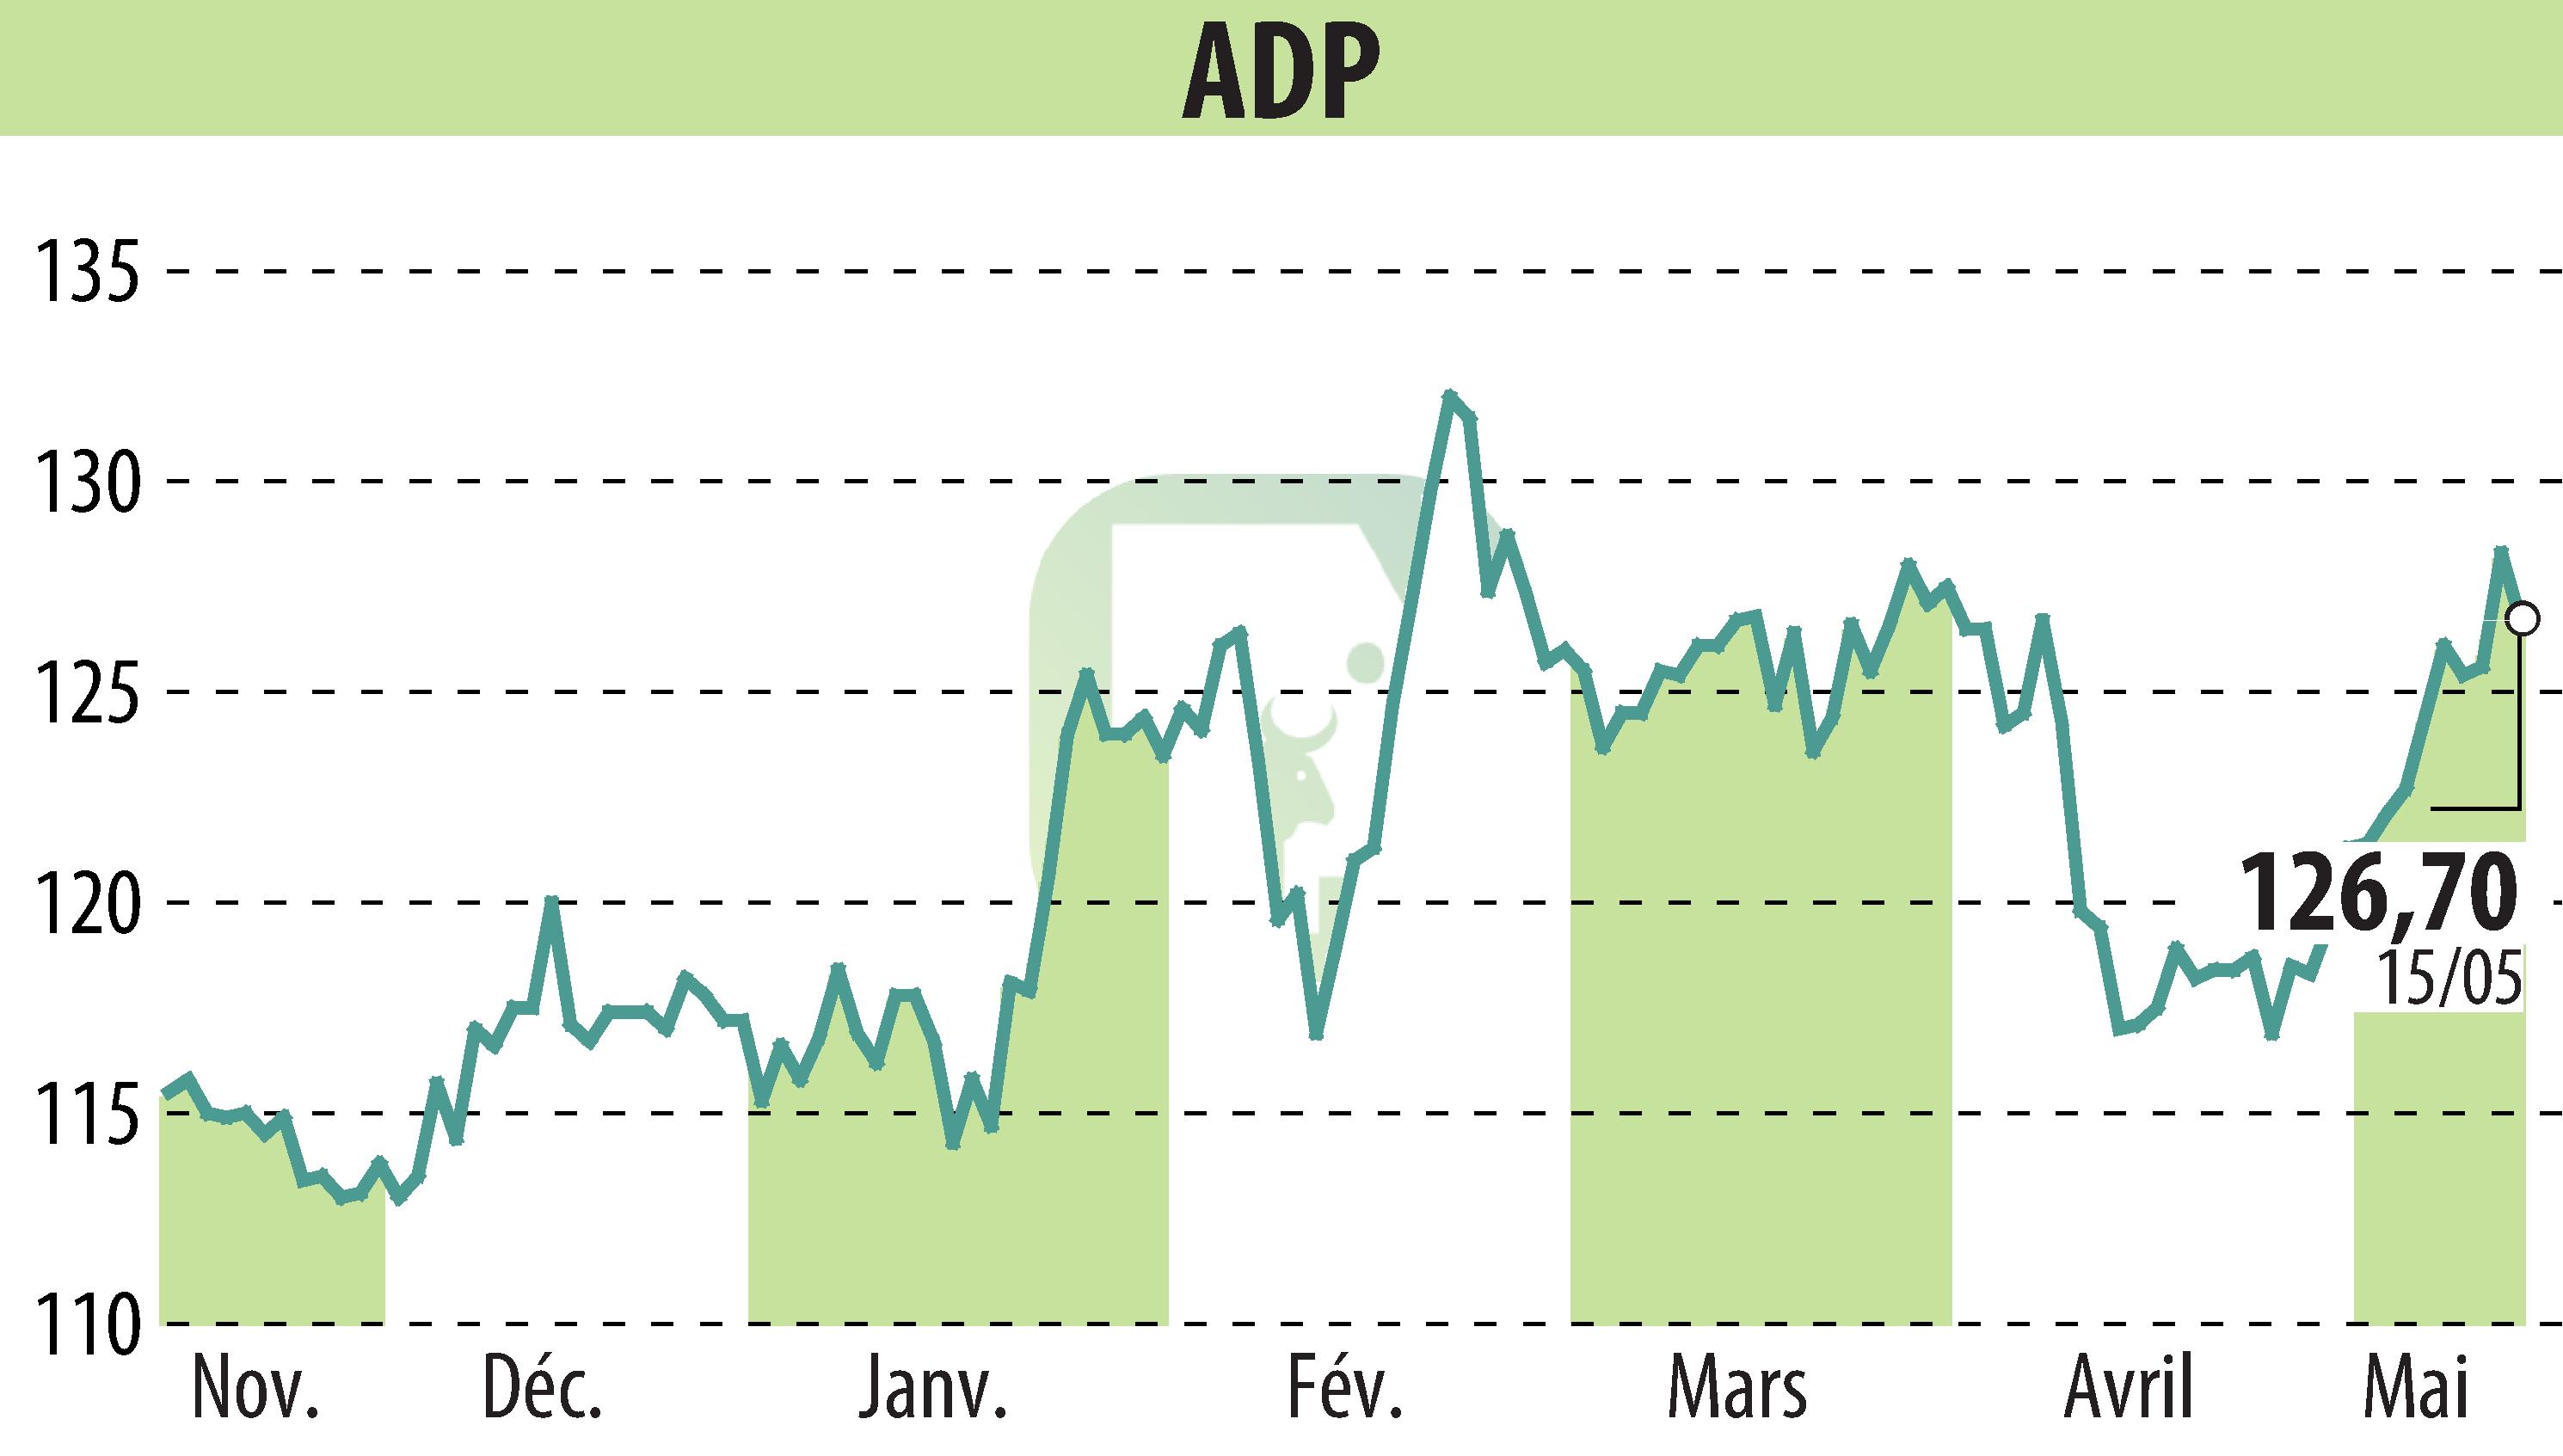 Stock price chart of GROUPE ADP (EPA:ADP) showing fluctuations.